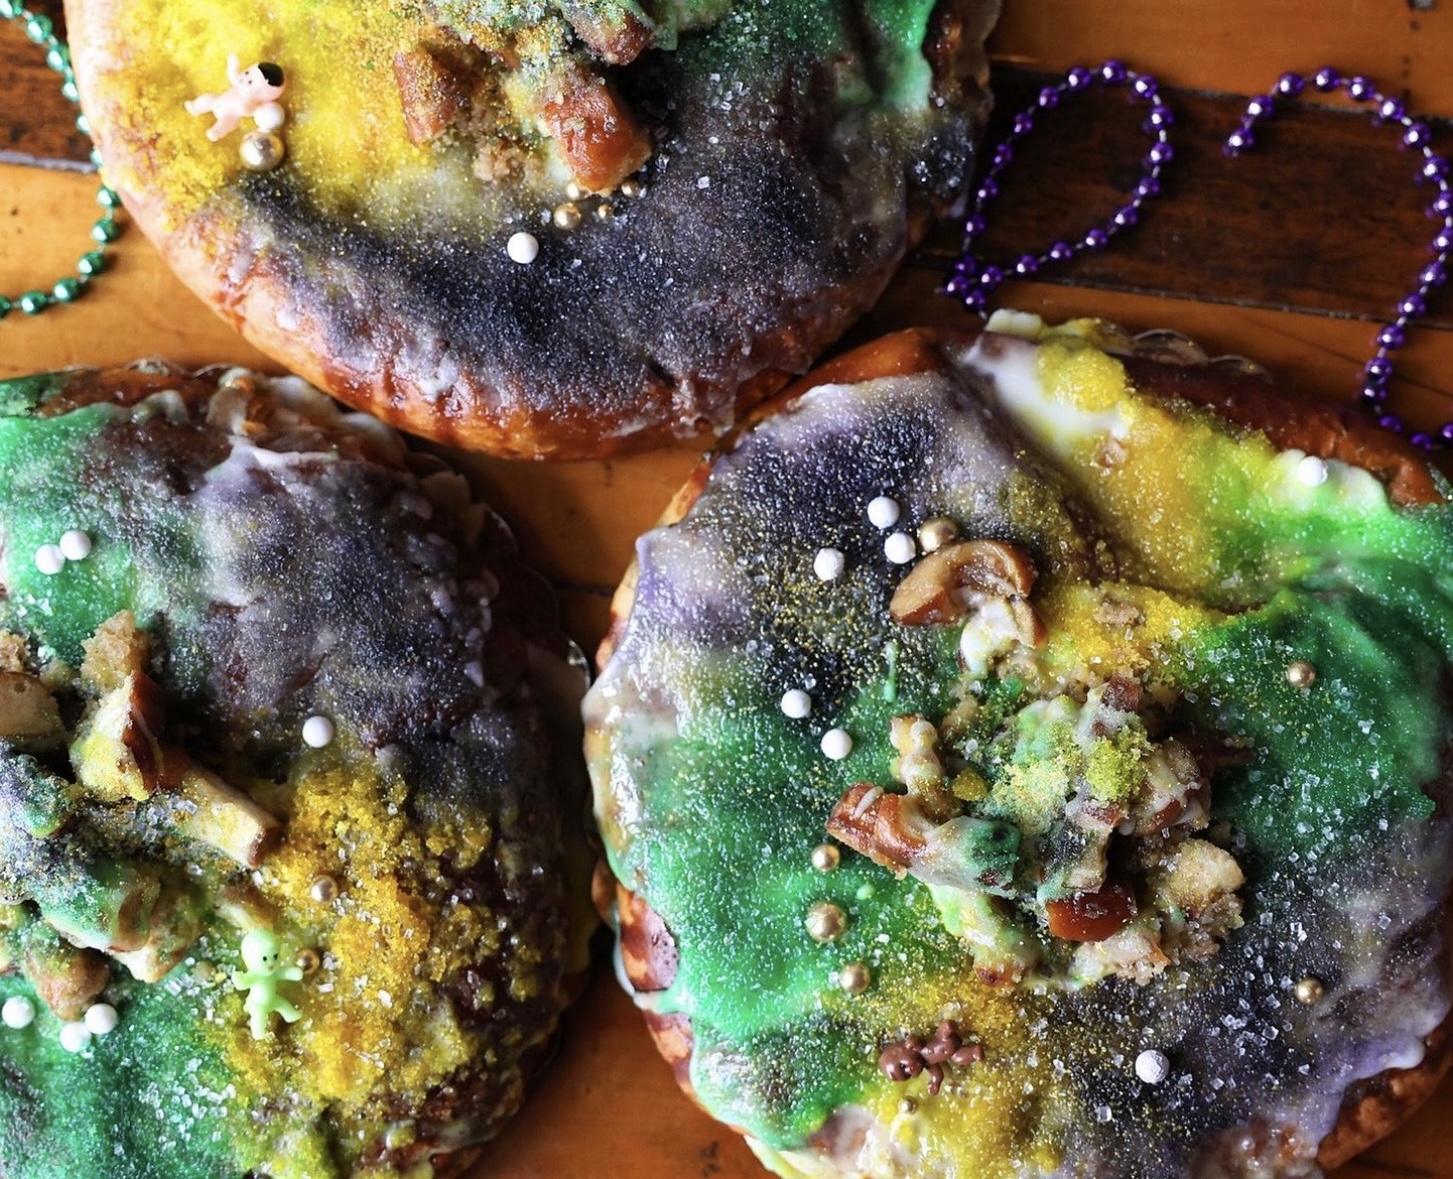 Three king cakes topped with green, white, yellow, and purple frosting sitting on a wooden surface with purple and green beaded necklaces surrounding it